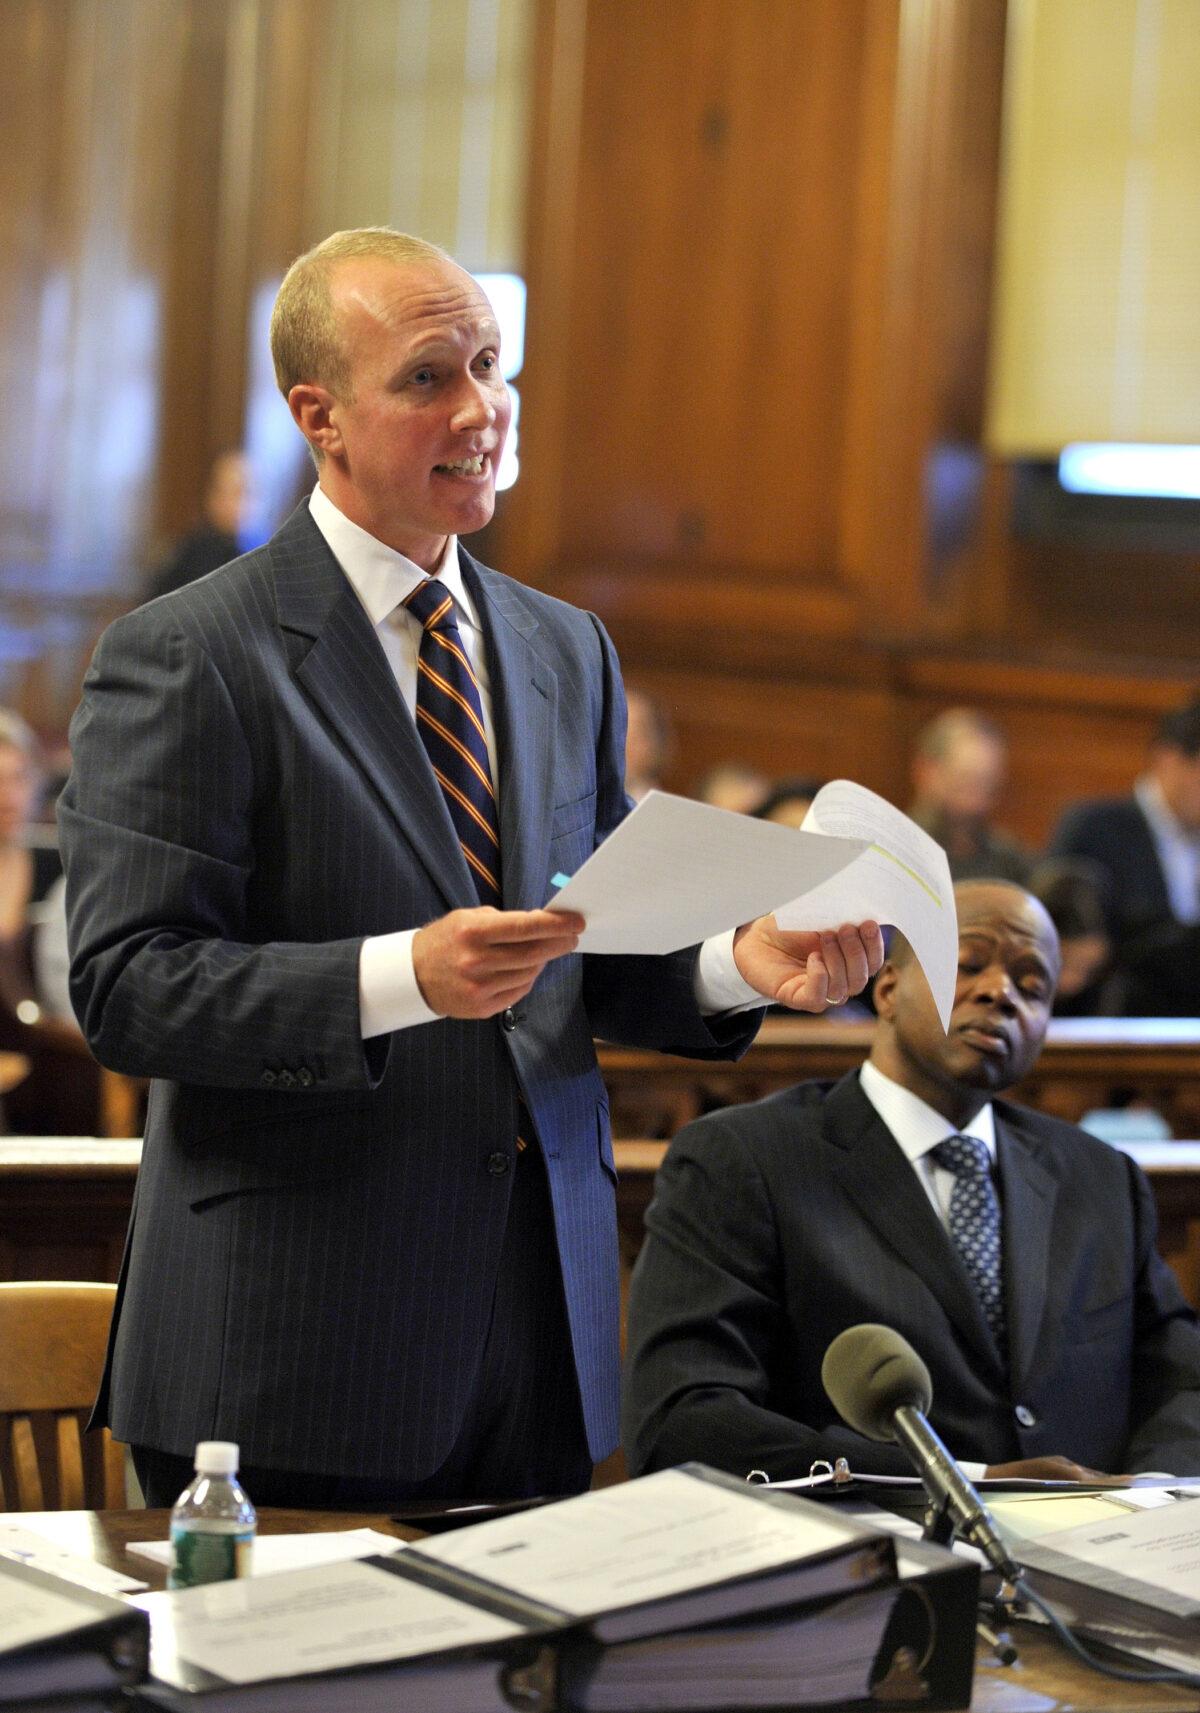 Attorney Douglas Wigdor speaks in New York City in a 2012 file photograph. (Stan Honda-Pool/Getty Images)